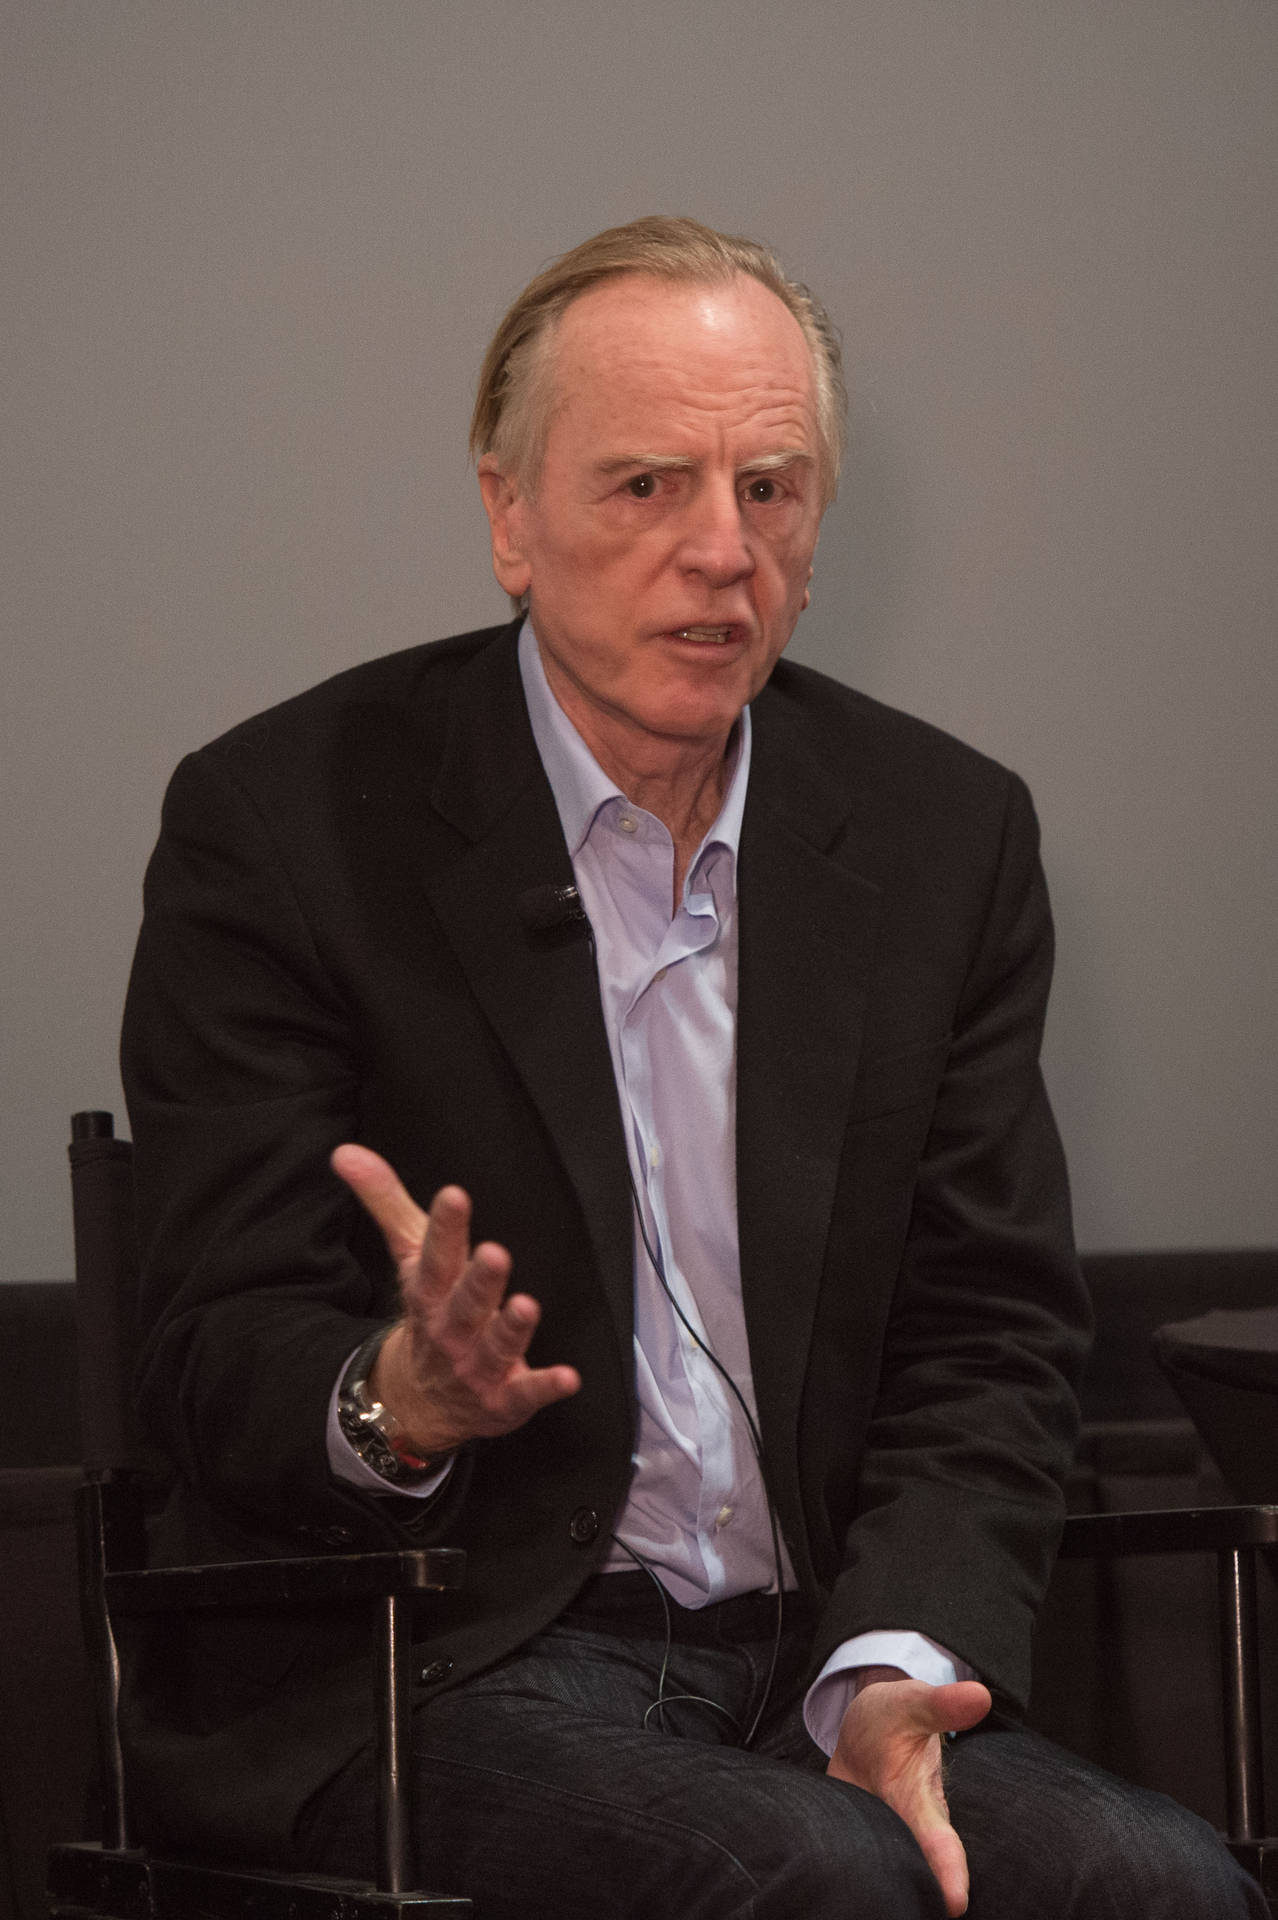 John Sculley Gesturing With His Hand Wallpaper